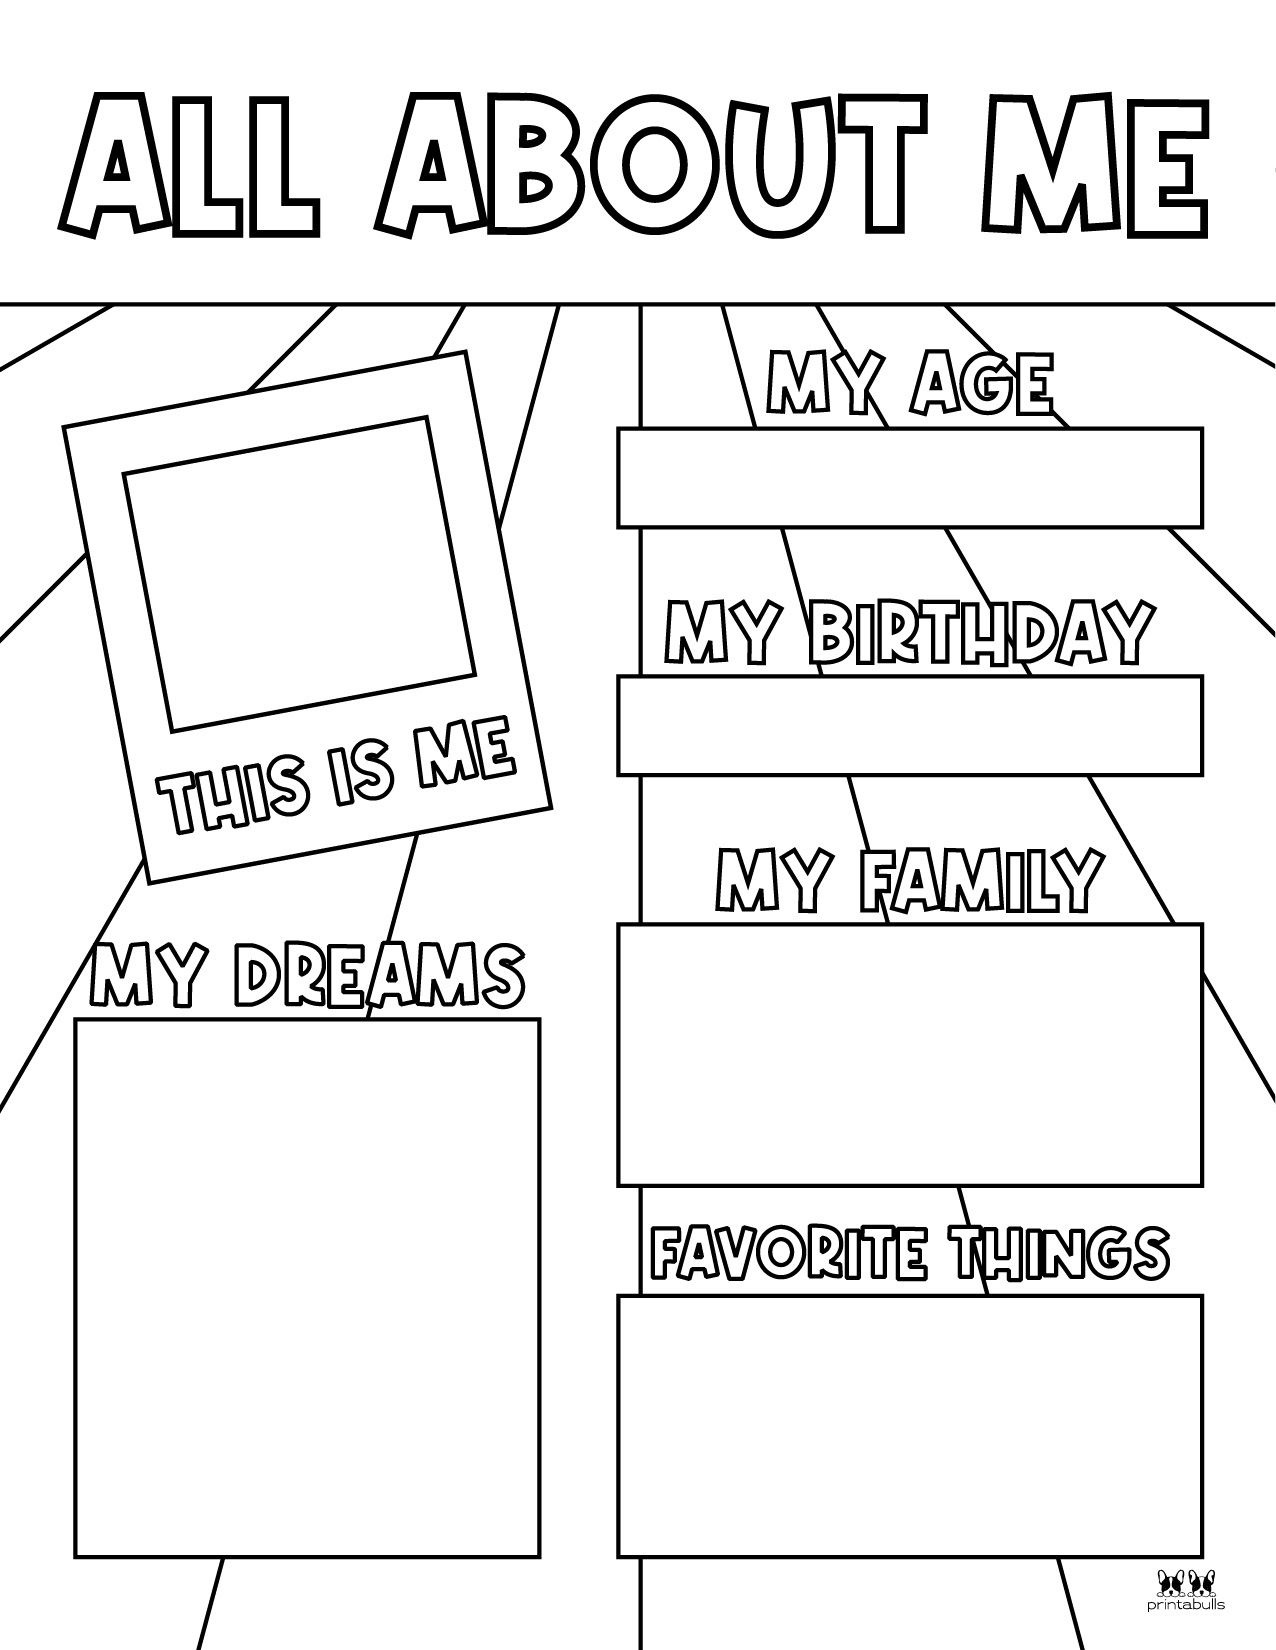 about-me-free-printable-in-this-all-about-me-worksheet-printable-you